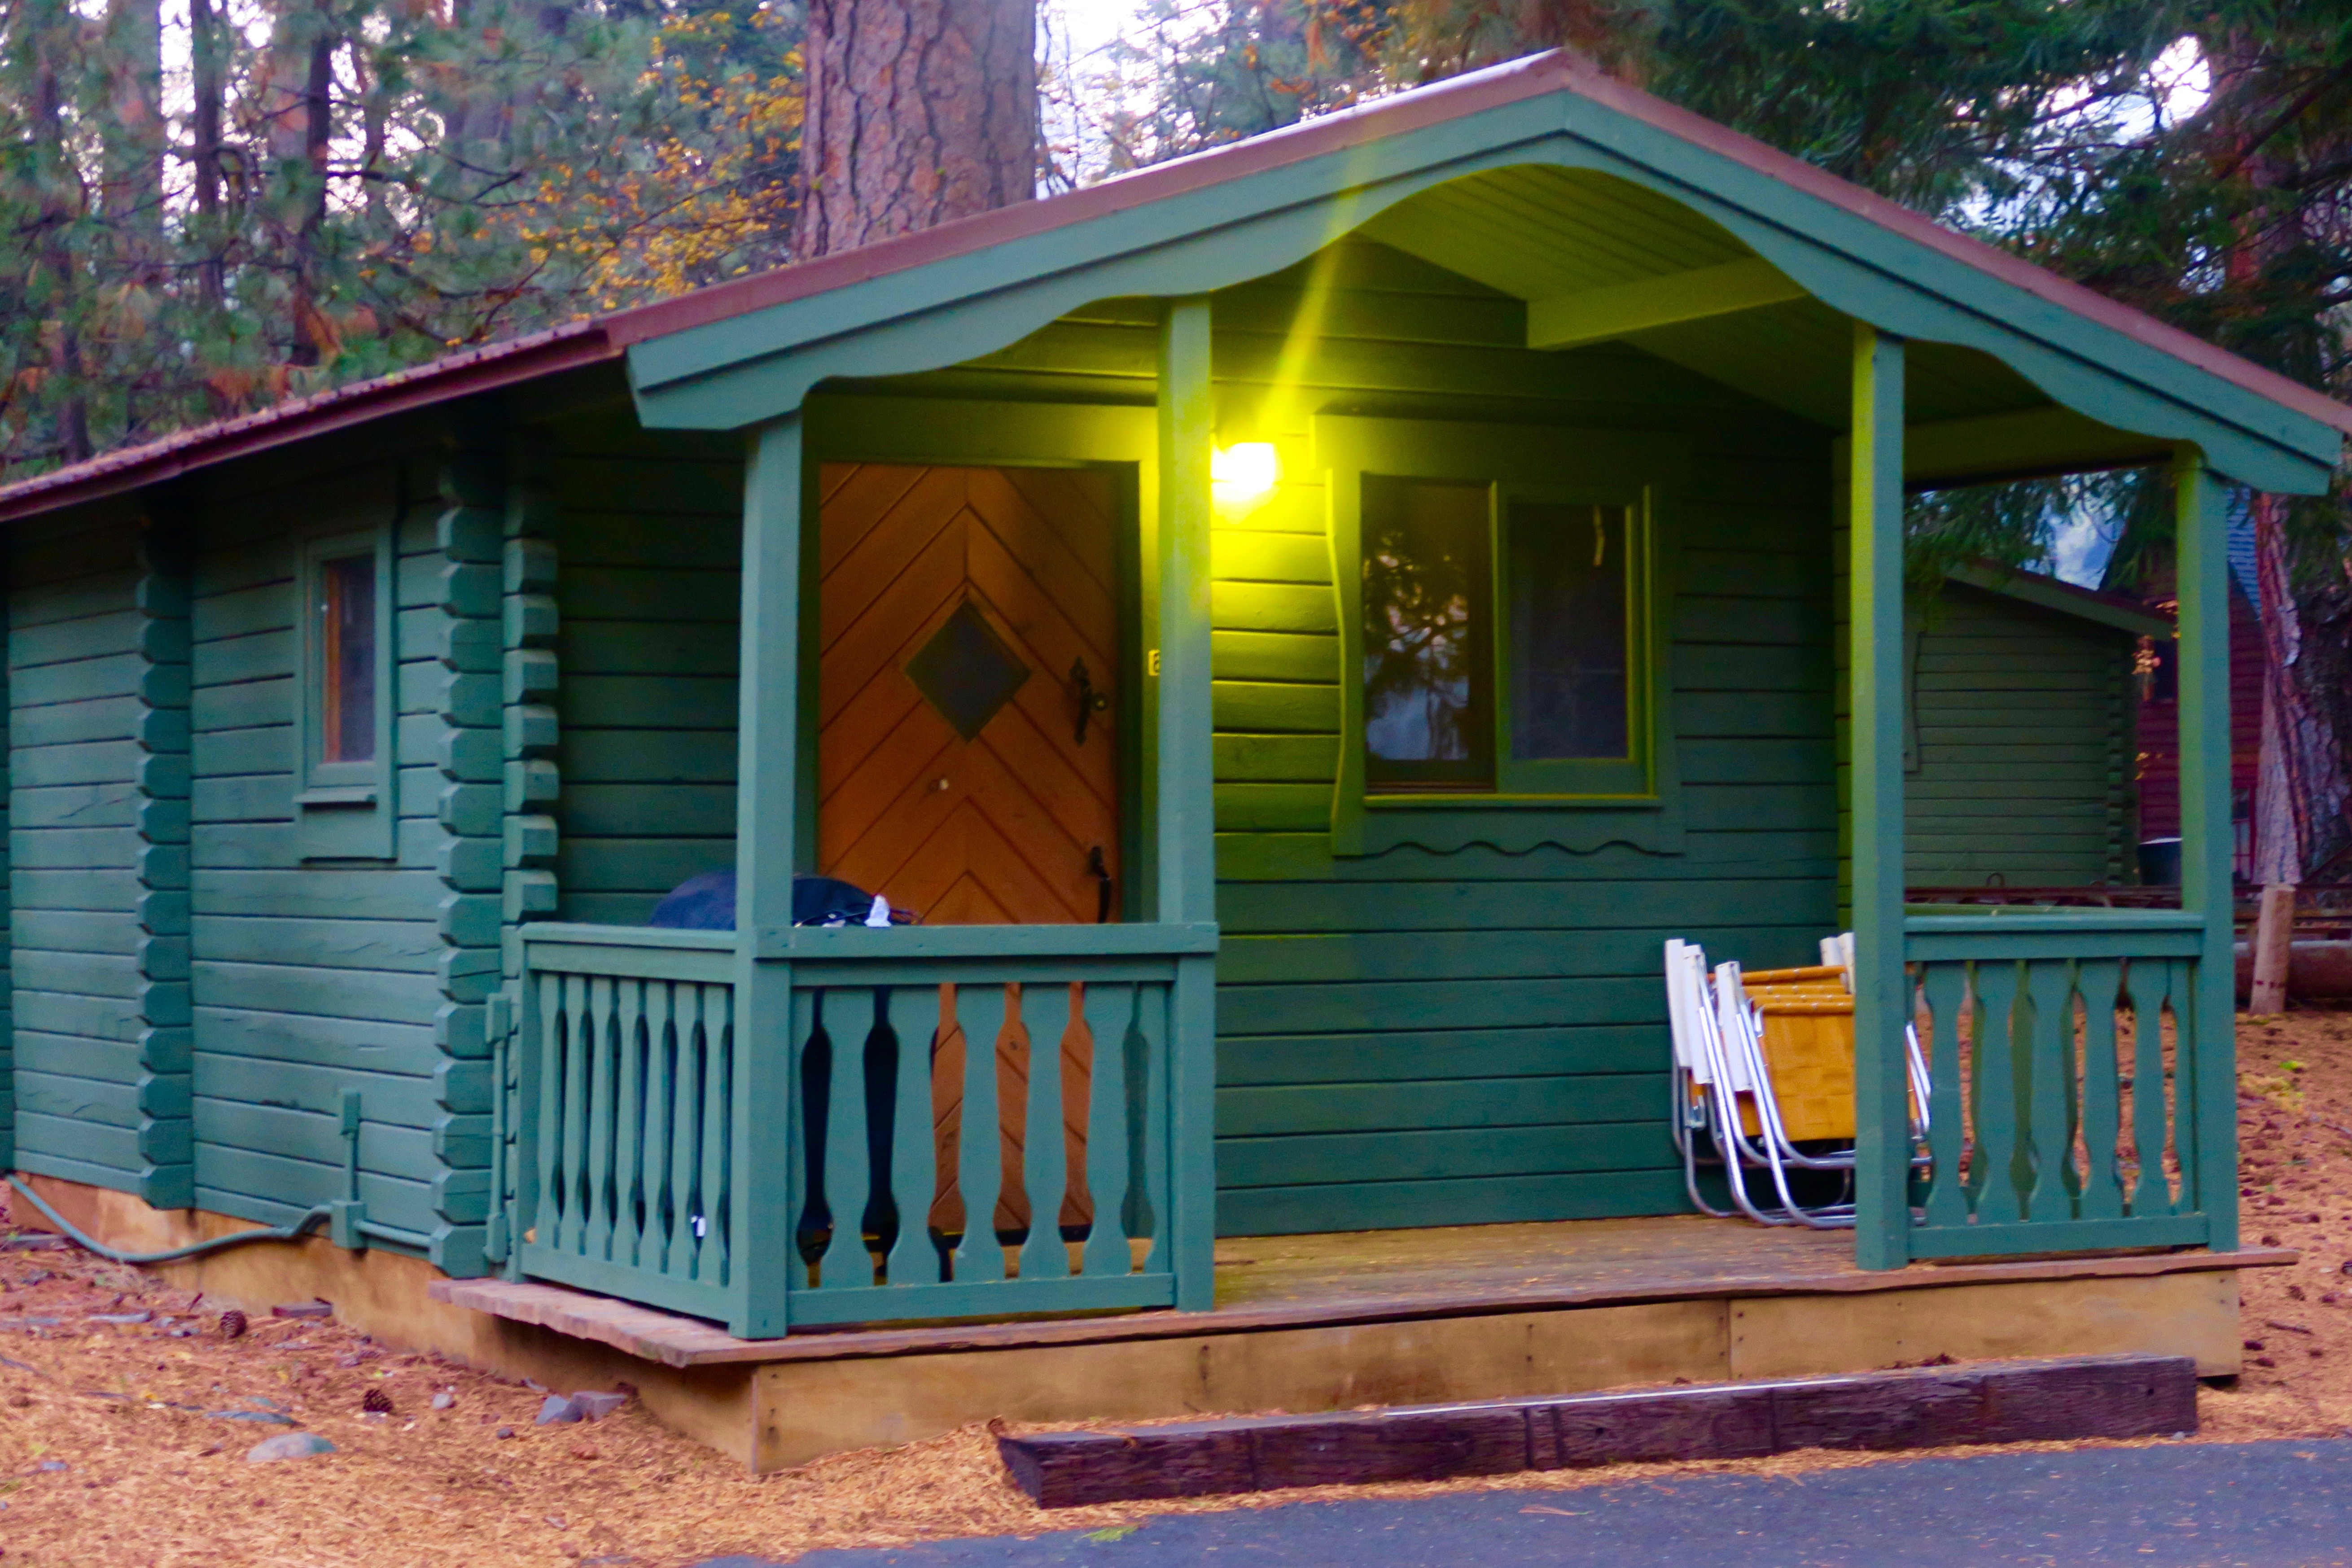 One of the Older Cabins